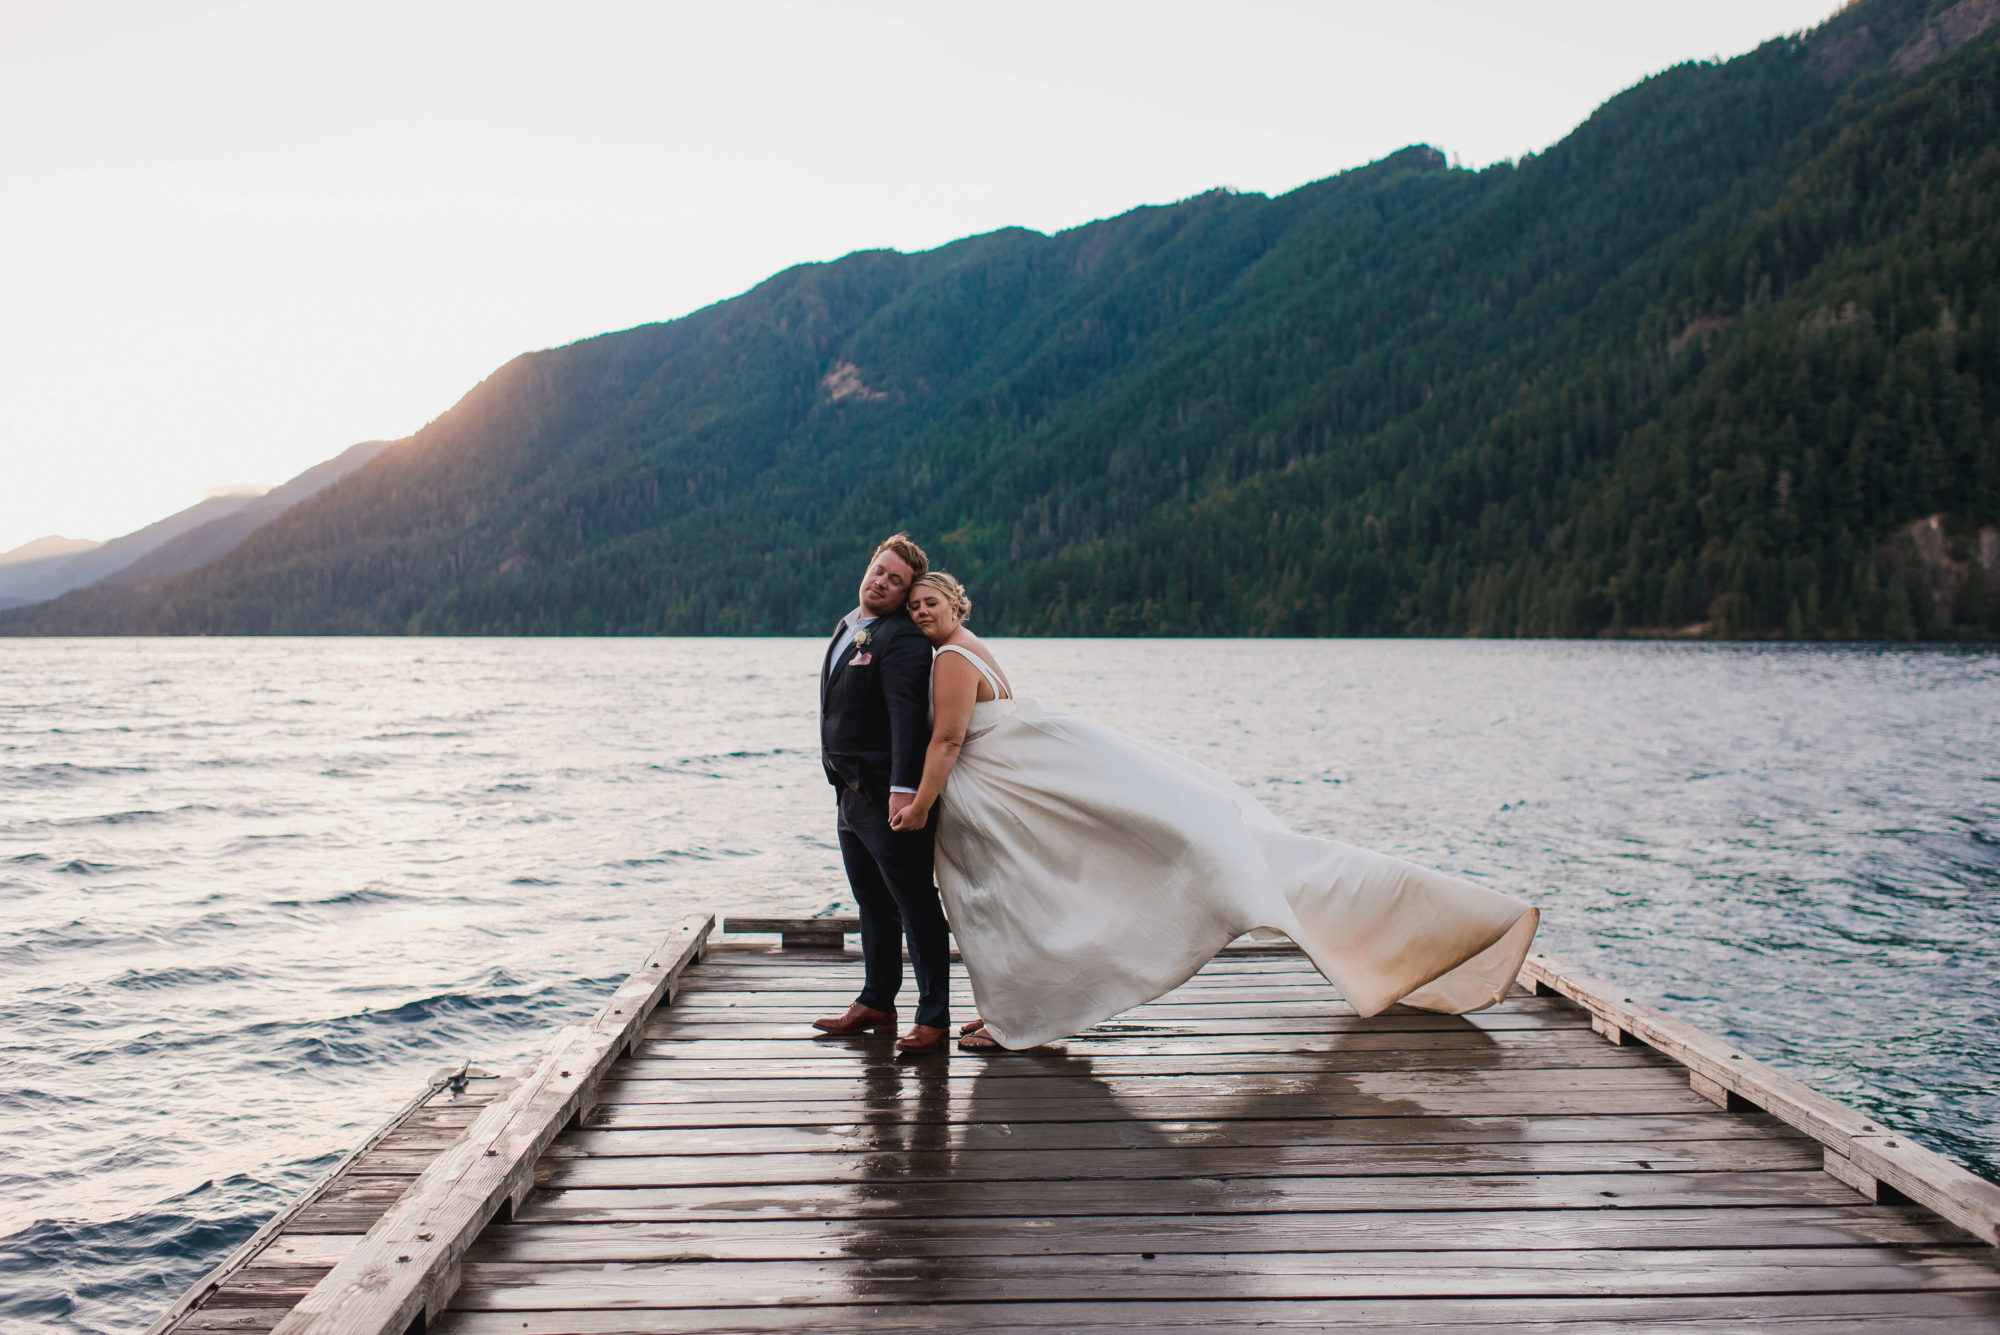 Bride and groom on the dock at sunset at Lake Crescent in Olympic National Park